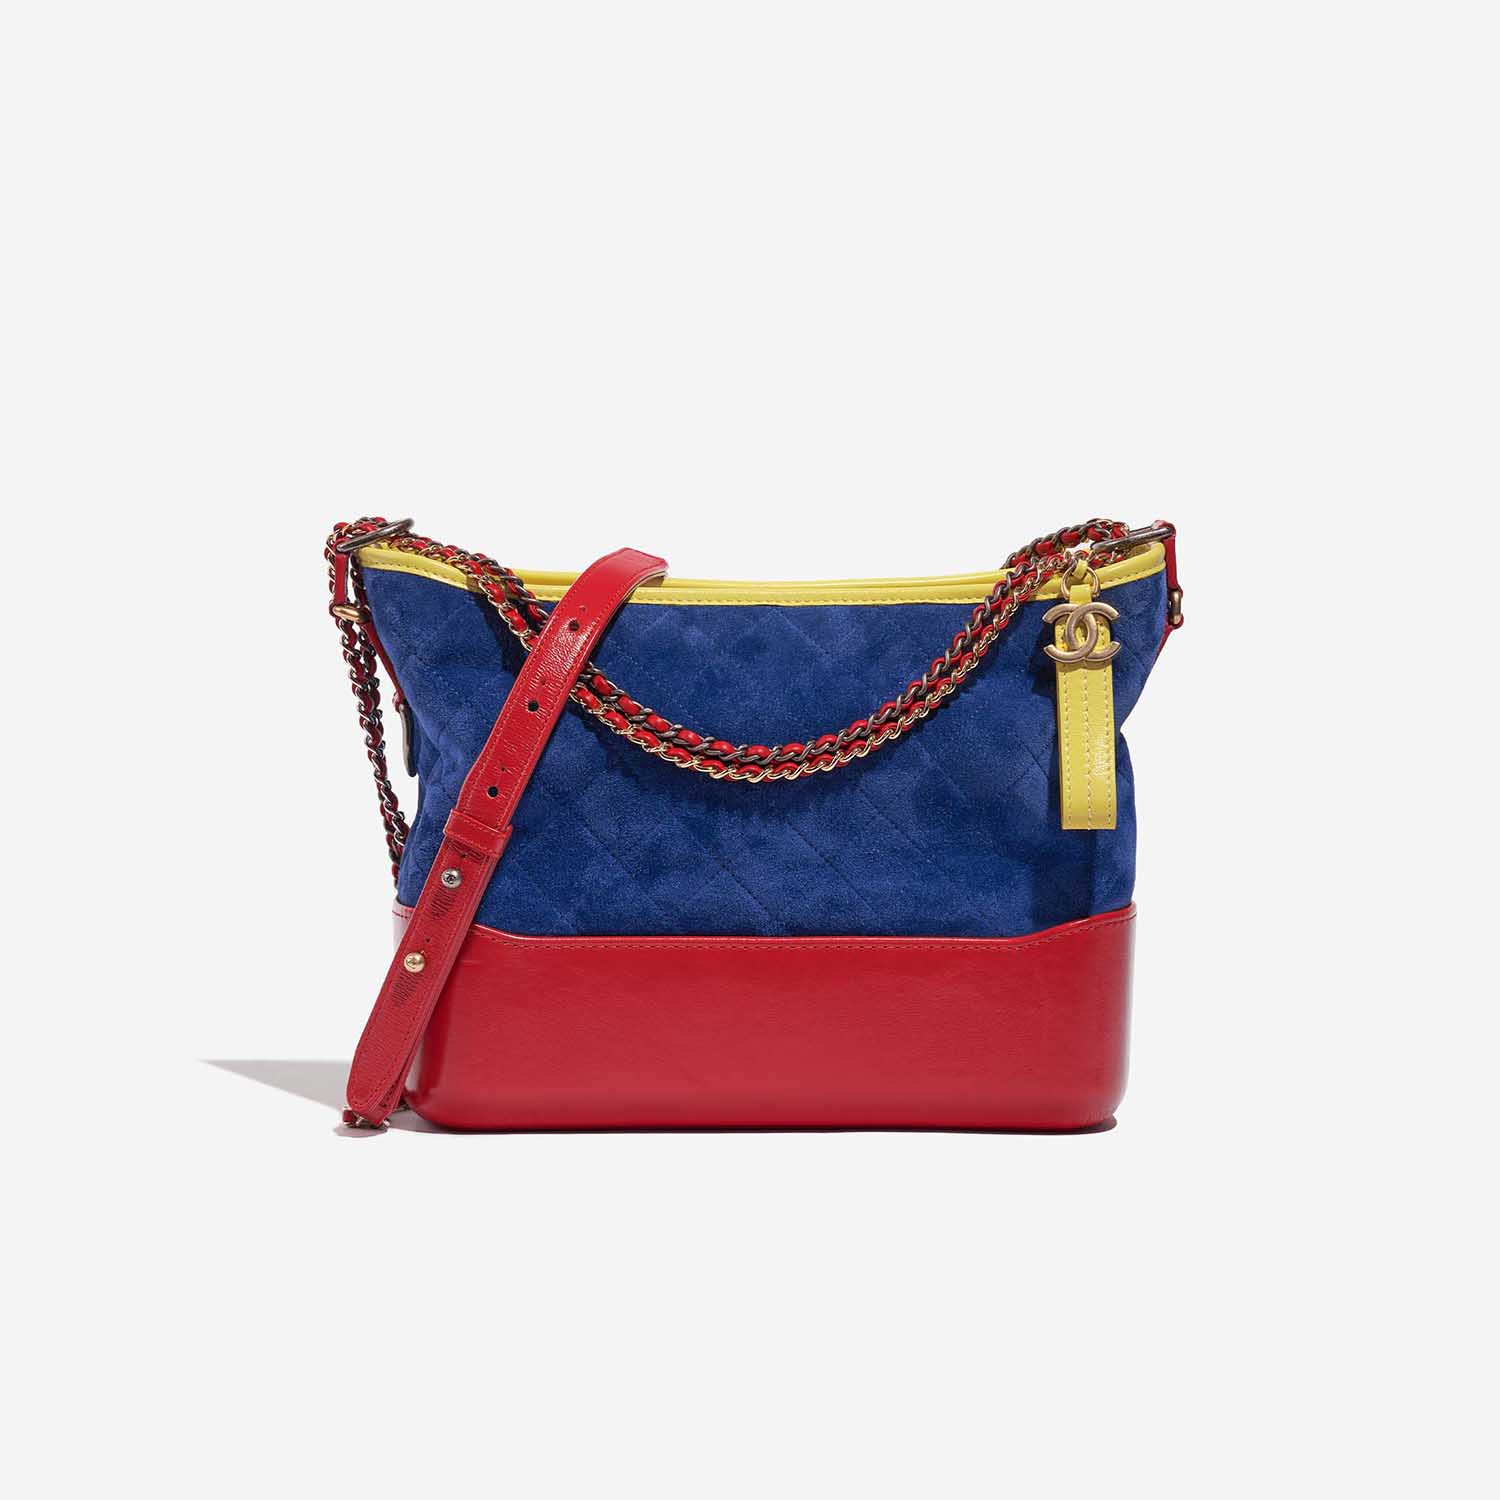 Pre-owned Chanel bag Gabrielle Medium Calf / Suede Blue / Red / Yellow Blue, Multicolour Front | Sell your designer bag on Saclab.com